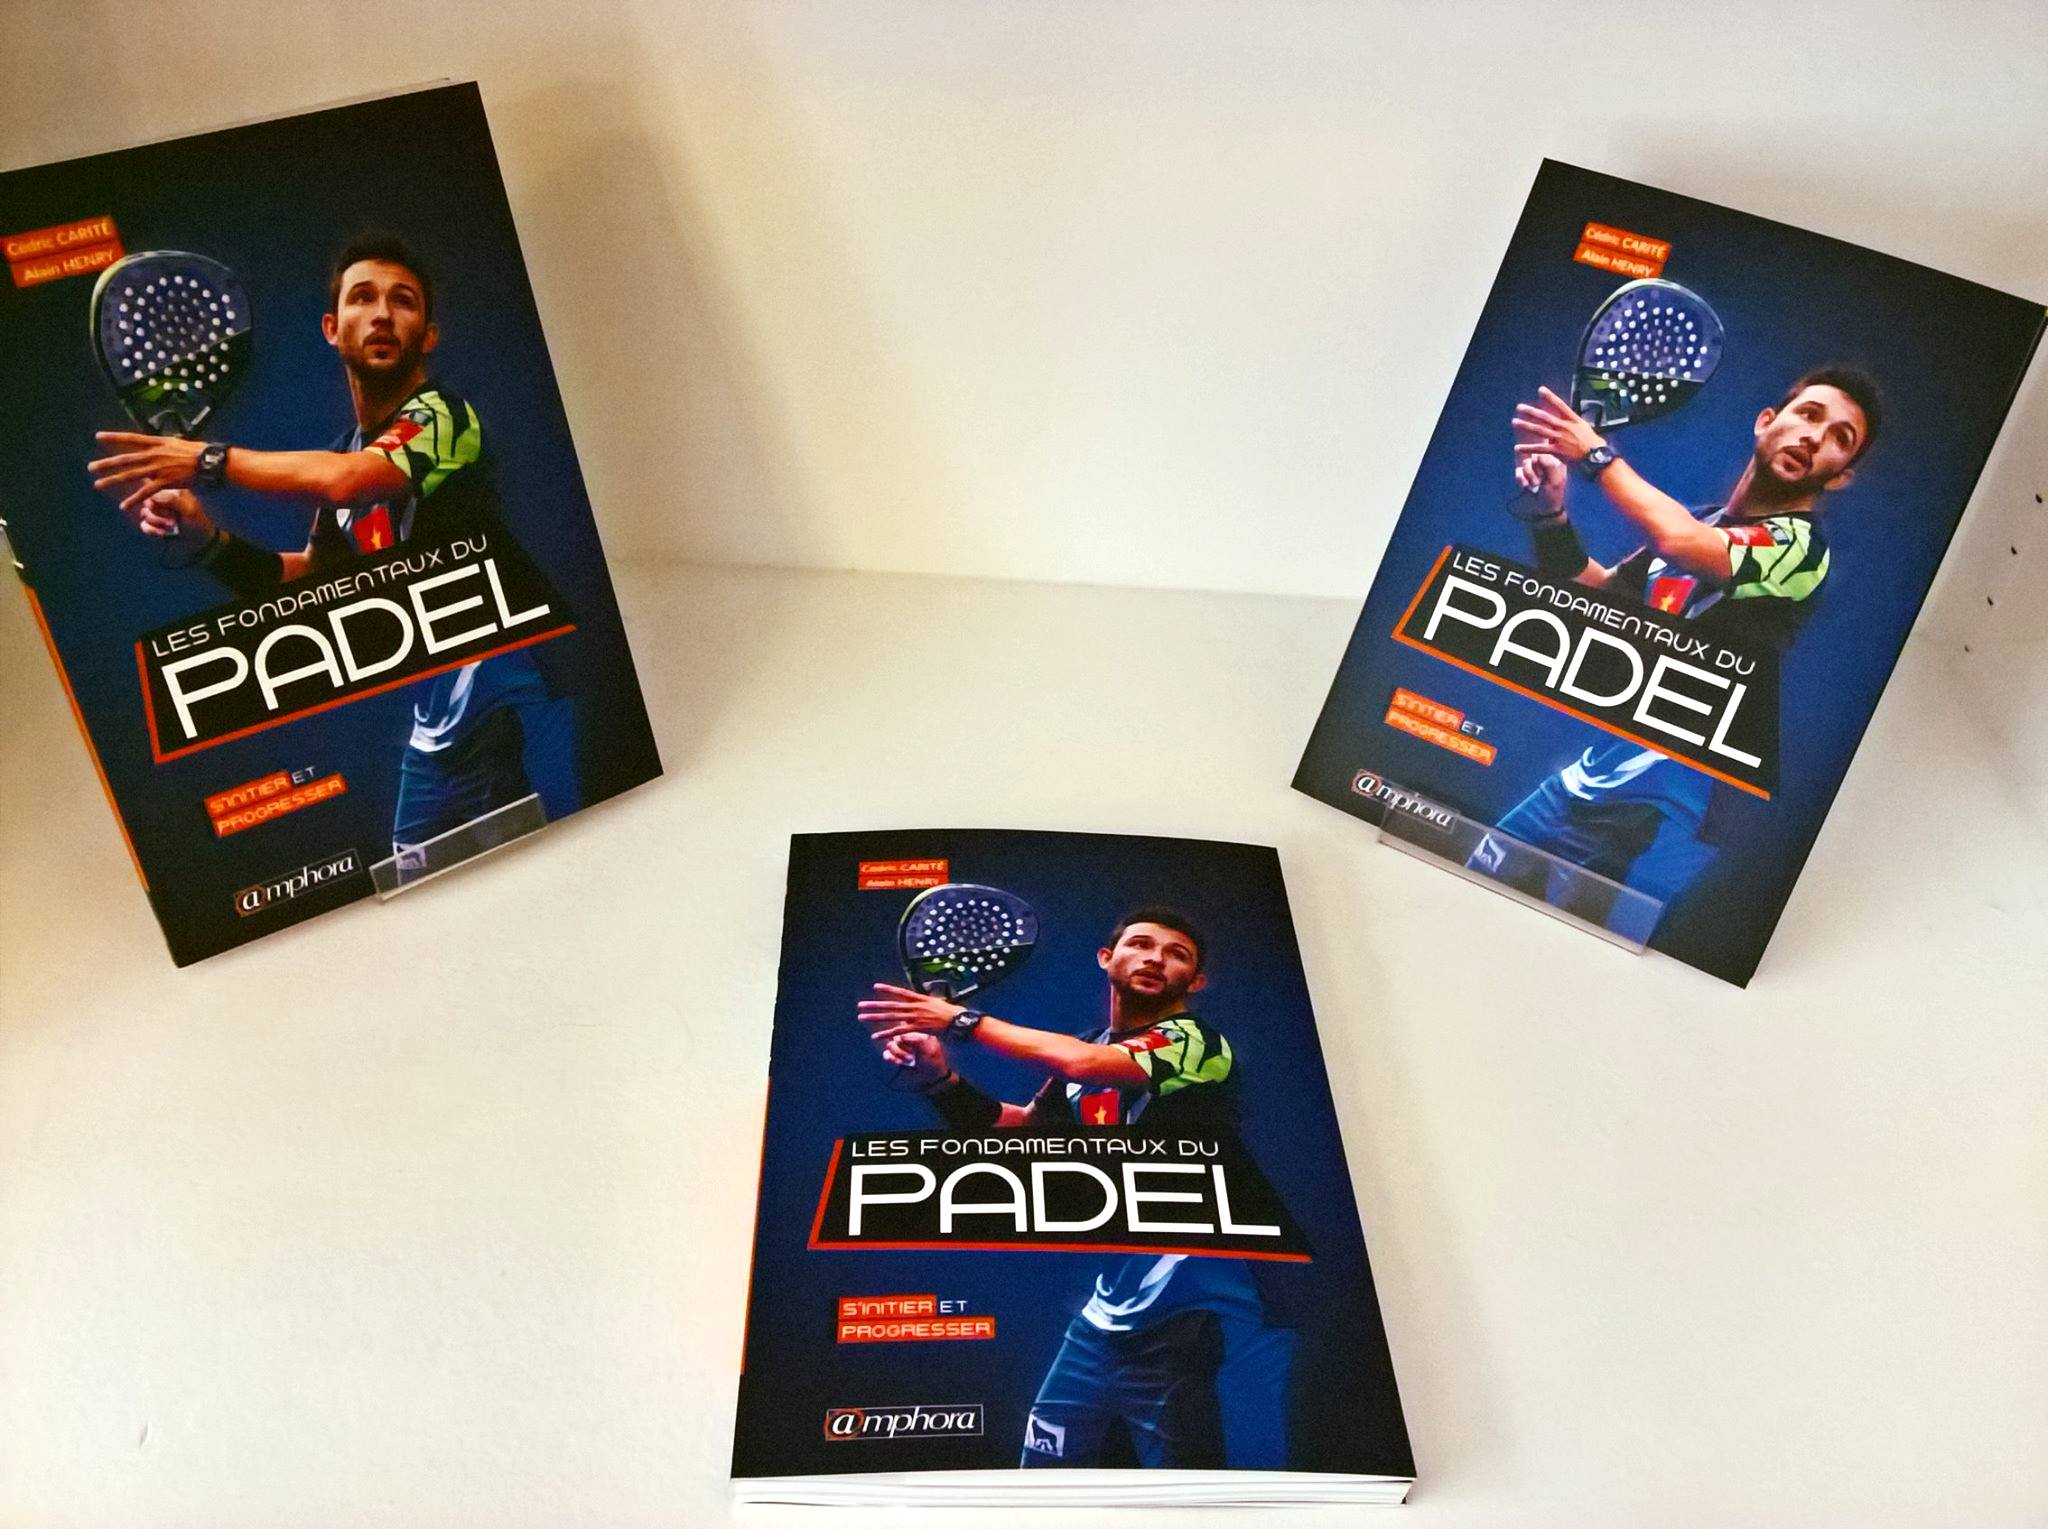 The fundamentals of padel to order now!